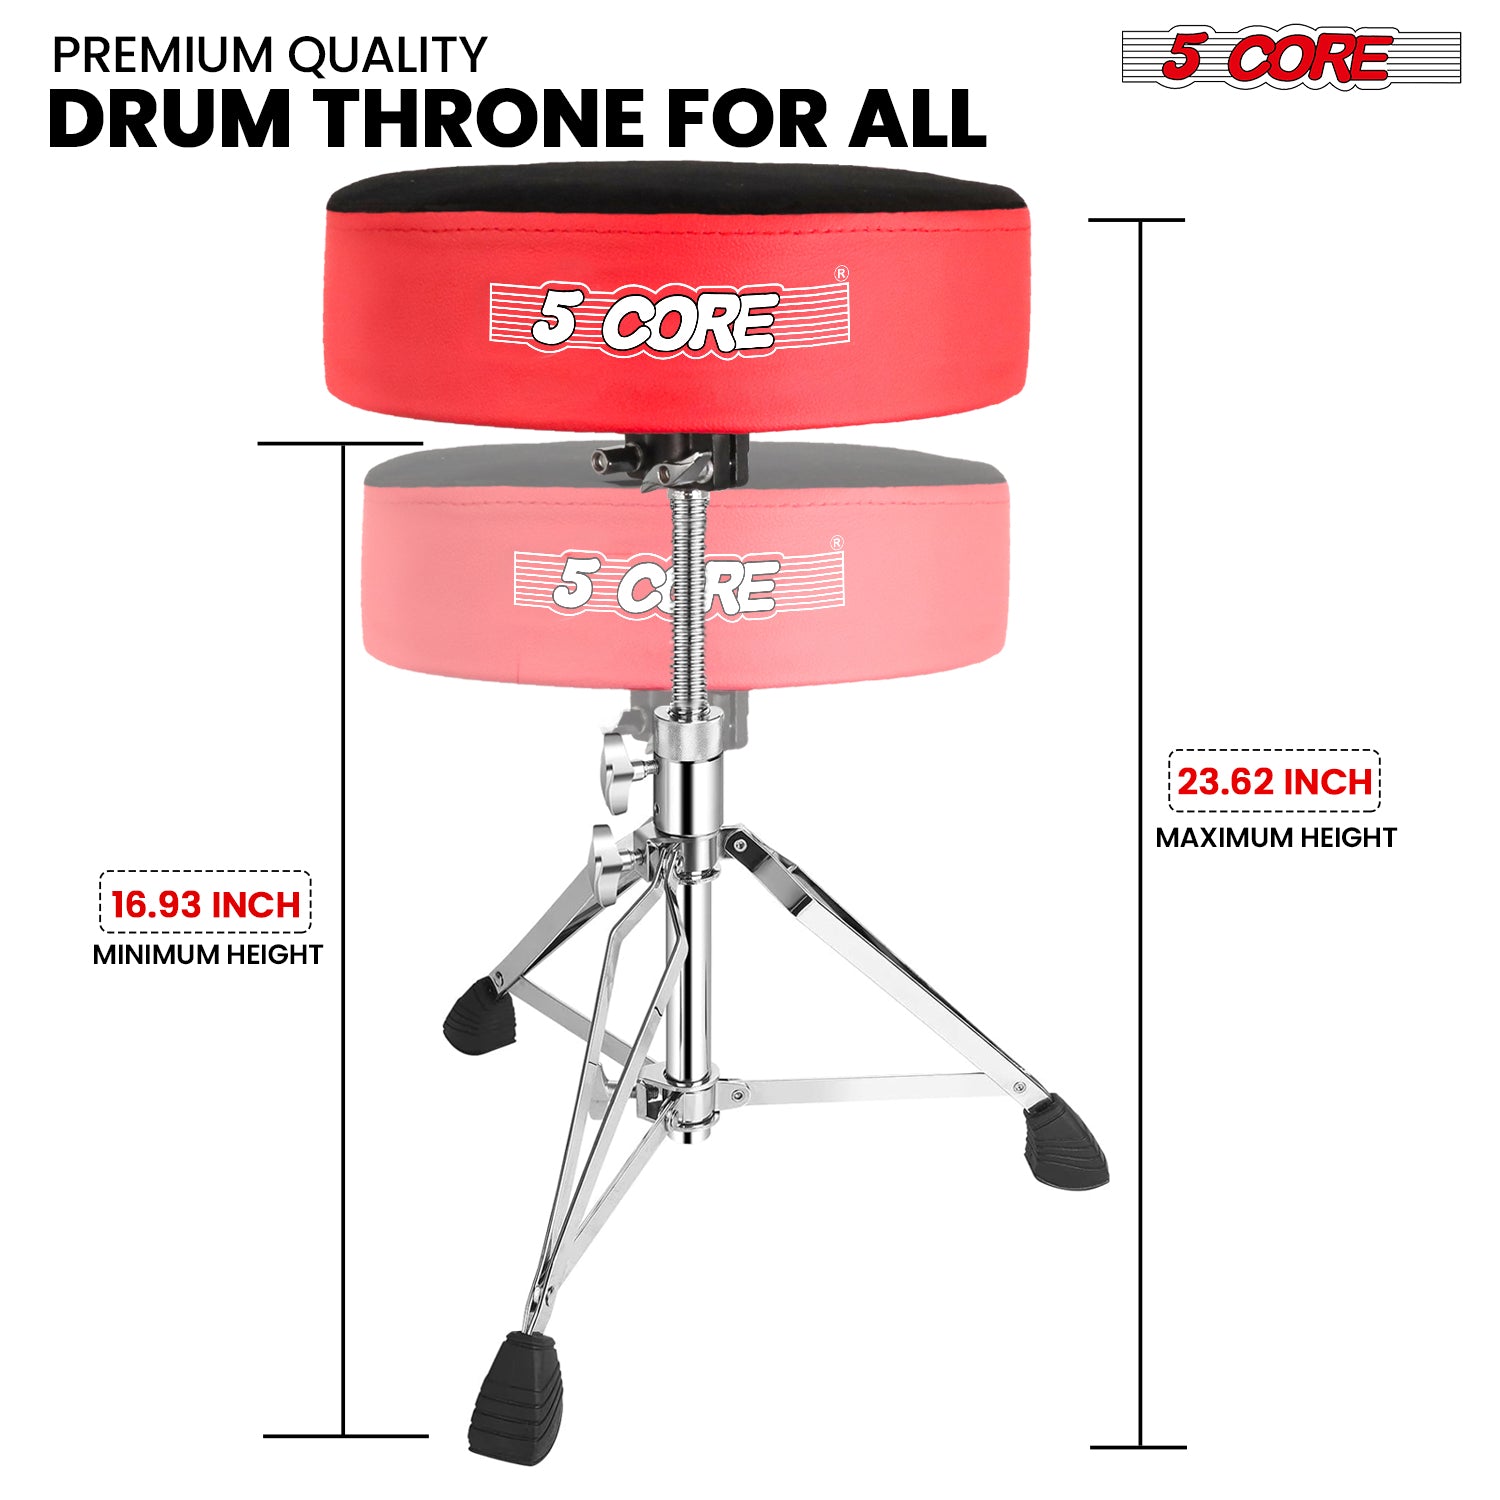 5 Core drum throne with comfortable padded seat, ideal for drummers and guitarists